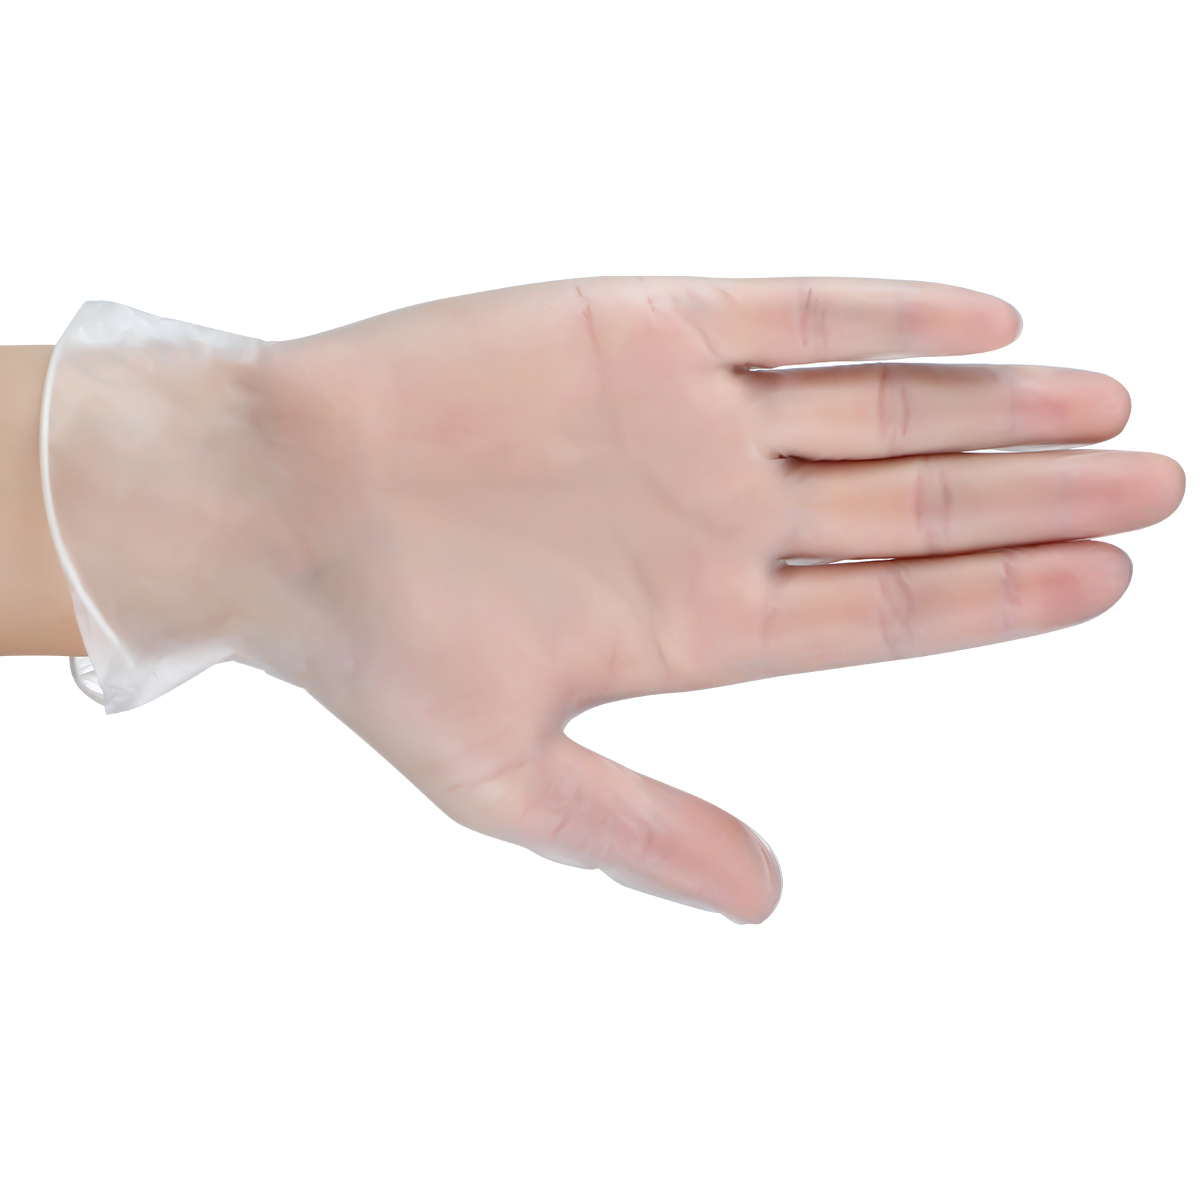 100-Pcs-Disposable-Latex-Free-Rubber-Gloves-Powder-Free-for-Industrial-Food-Service-Cleaning-and-Mor-1774256-1